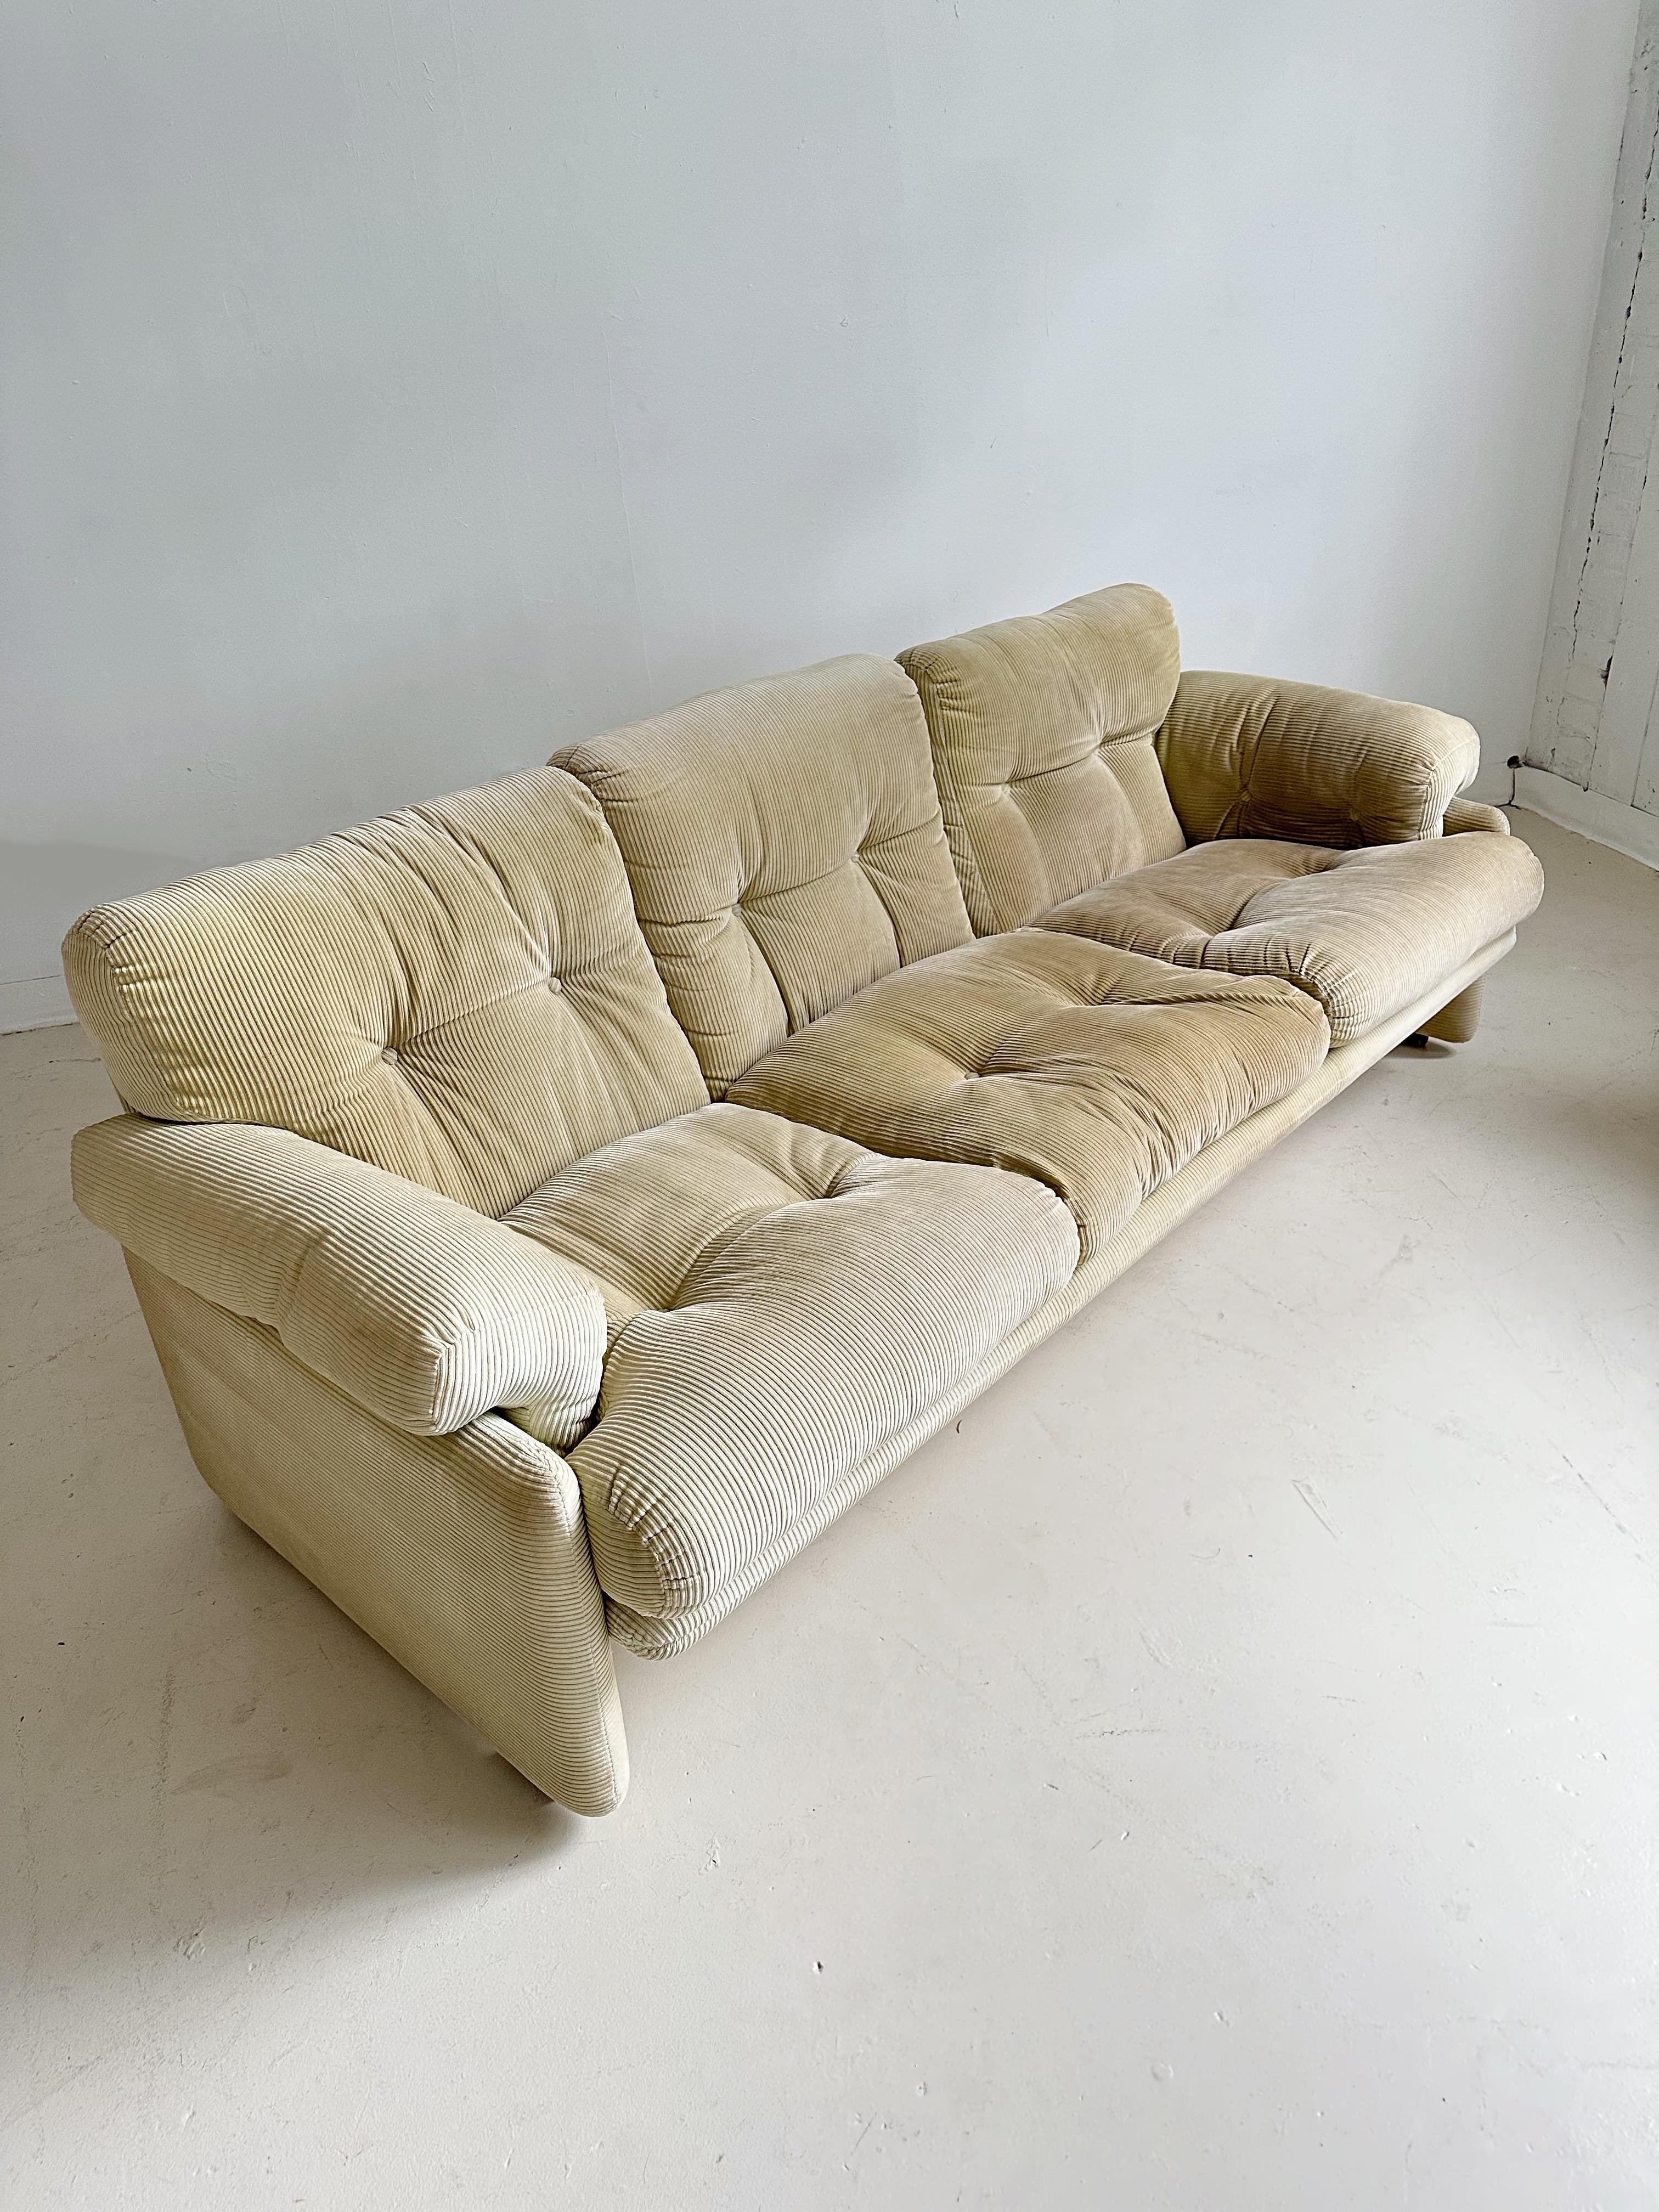 Beige Corduroy 3 Seater Coronado Sofa by Tobia Scarpa for C&B, 70's

//

Dimensions:
81”W x 34”D x 27”H 

65” seat width x 22” seat depth x 18” seat height

//

*OK condition, fading and minor stains on corduroy, a small rip around the button of the